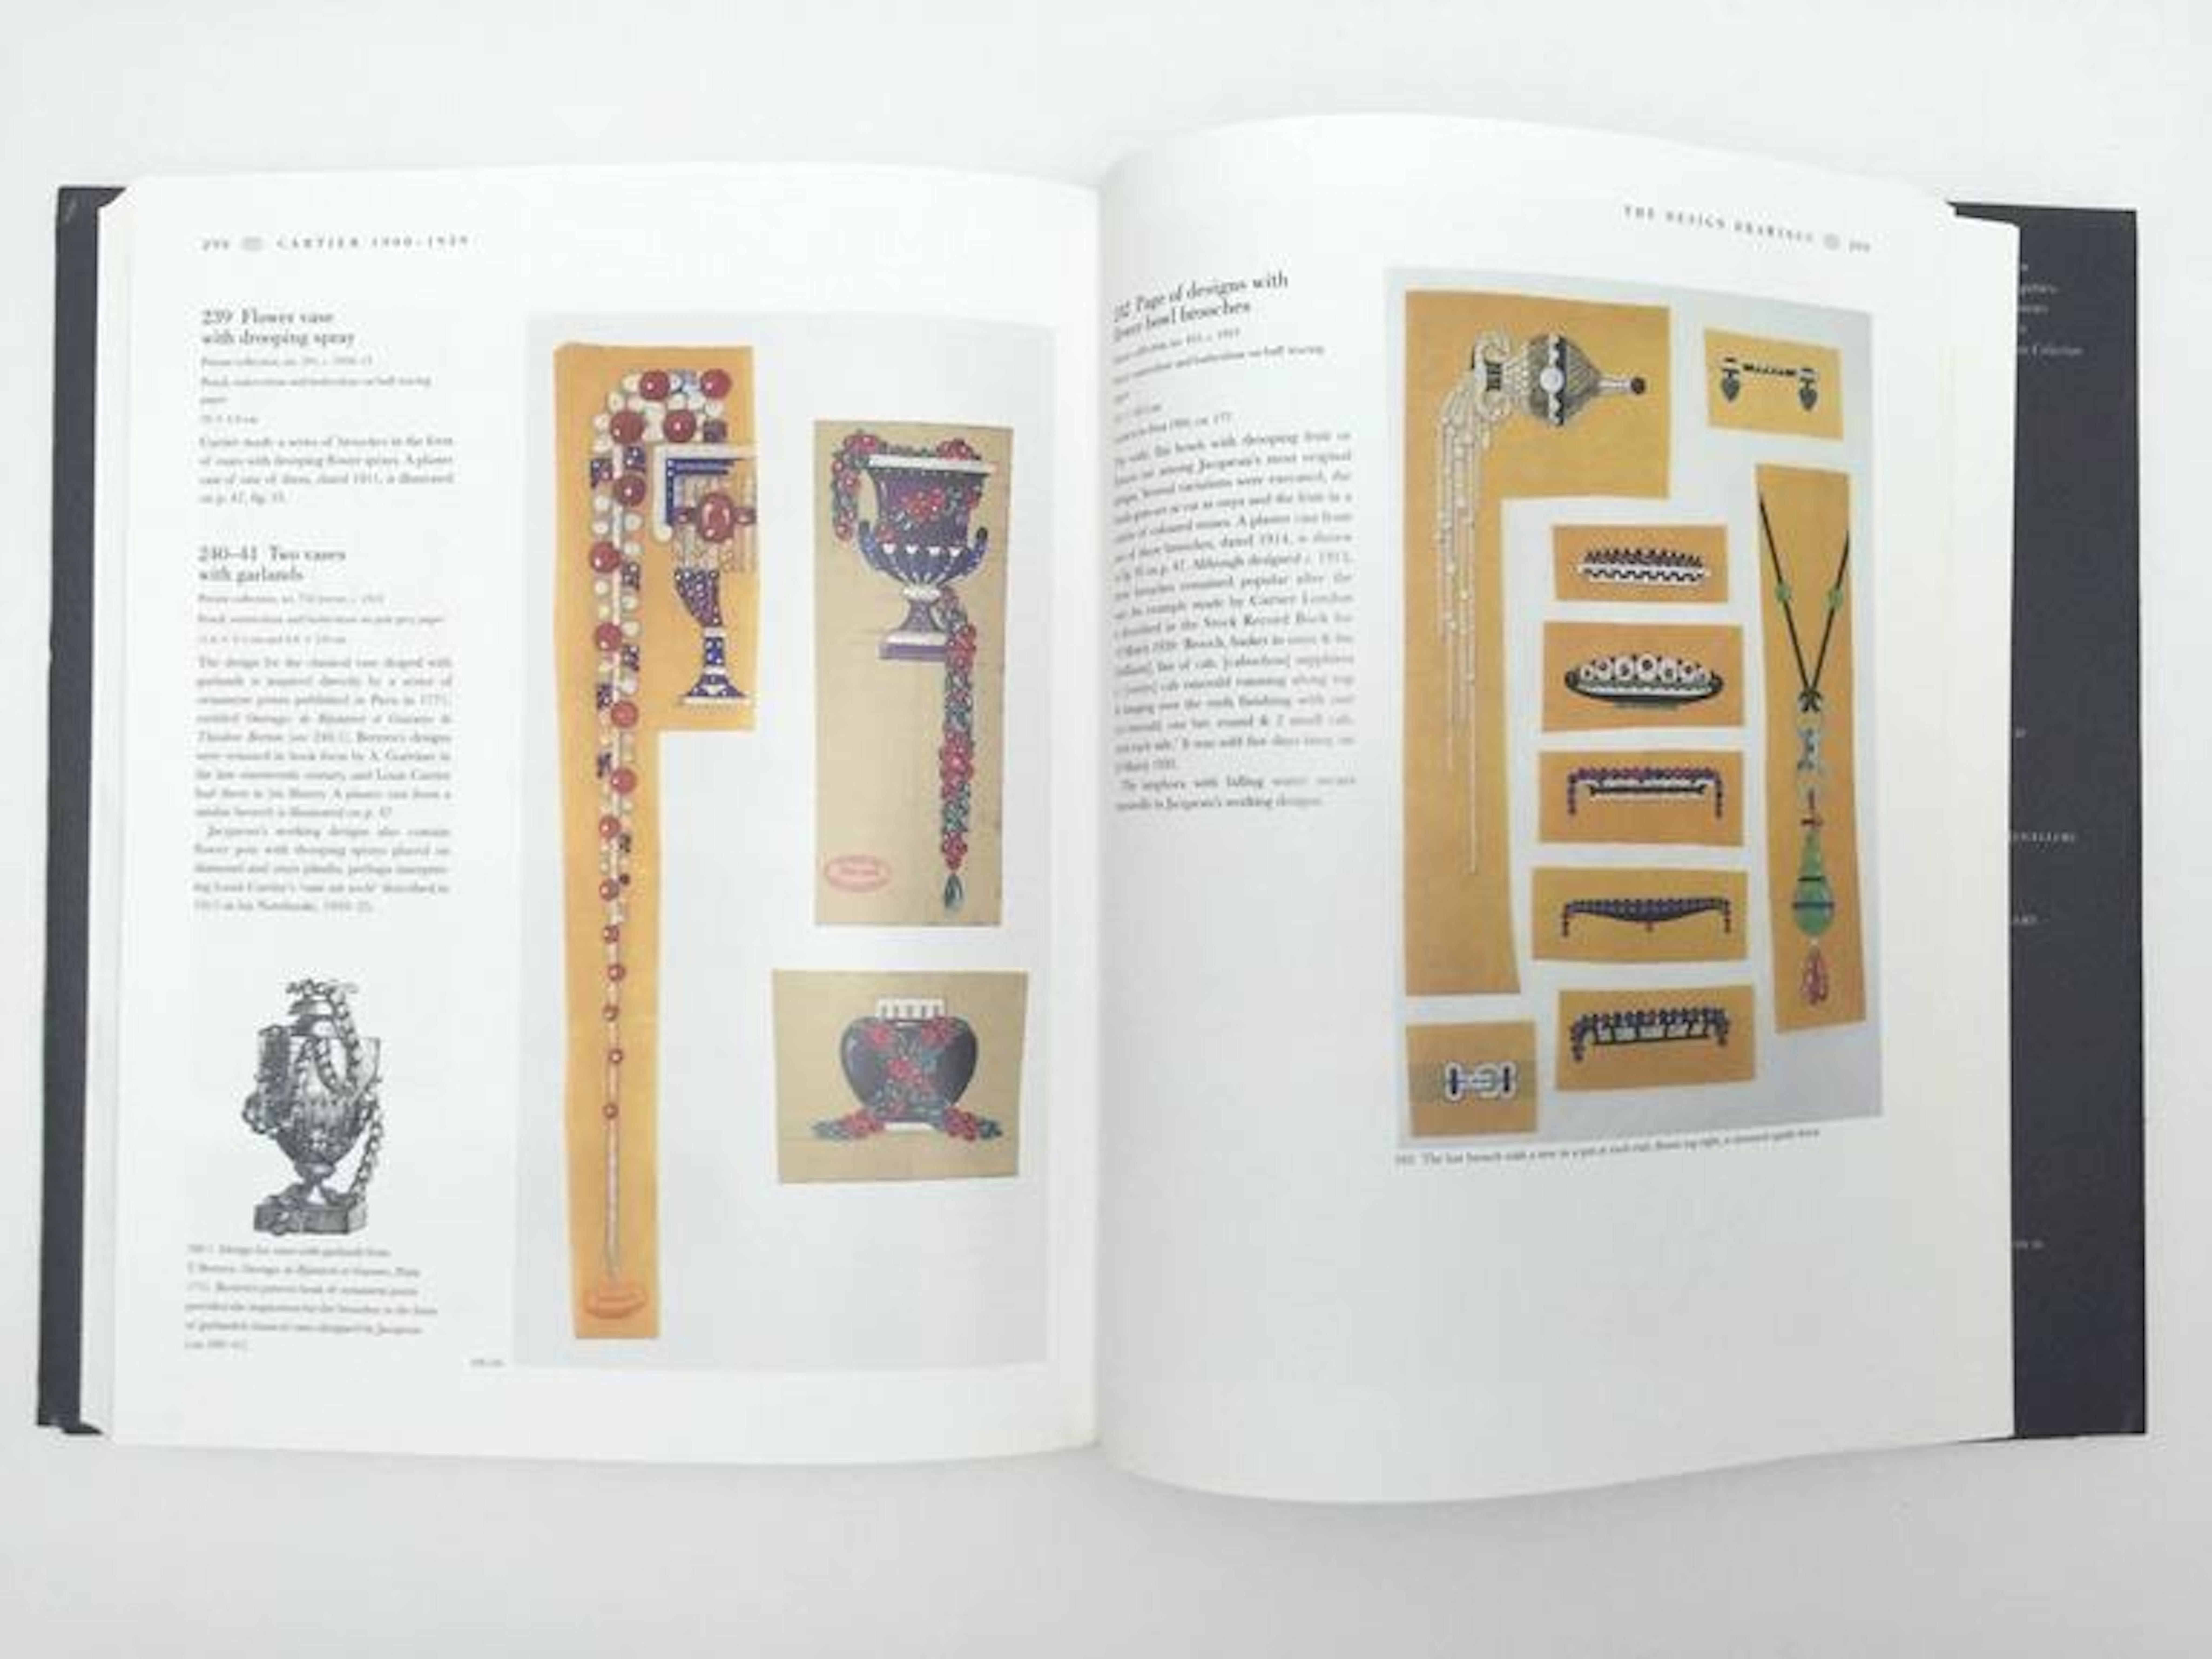 First edition.

Published by The British Museum Press in 1997.

In conjunction with the 150th anniversary of the founding of Cartier in Paris in 1847, this catalogue showcases the 227 objects that originate from Cartier's illustrious collection.